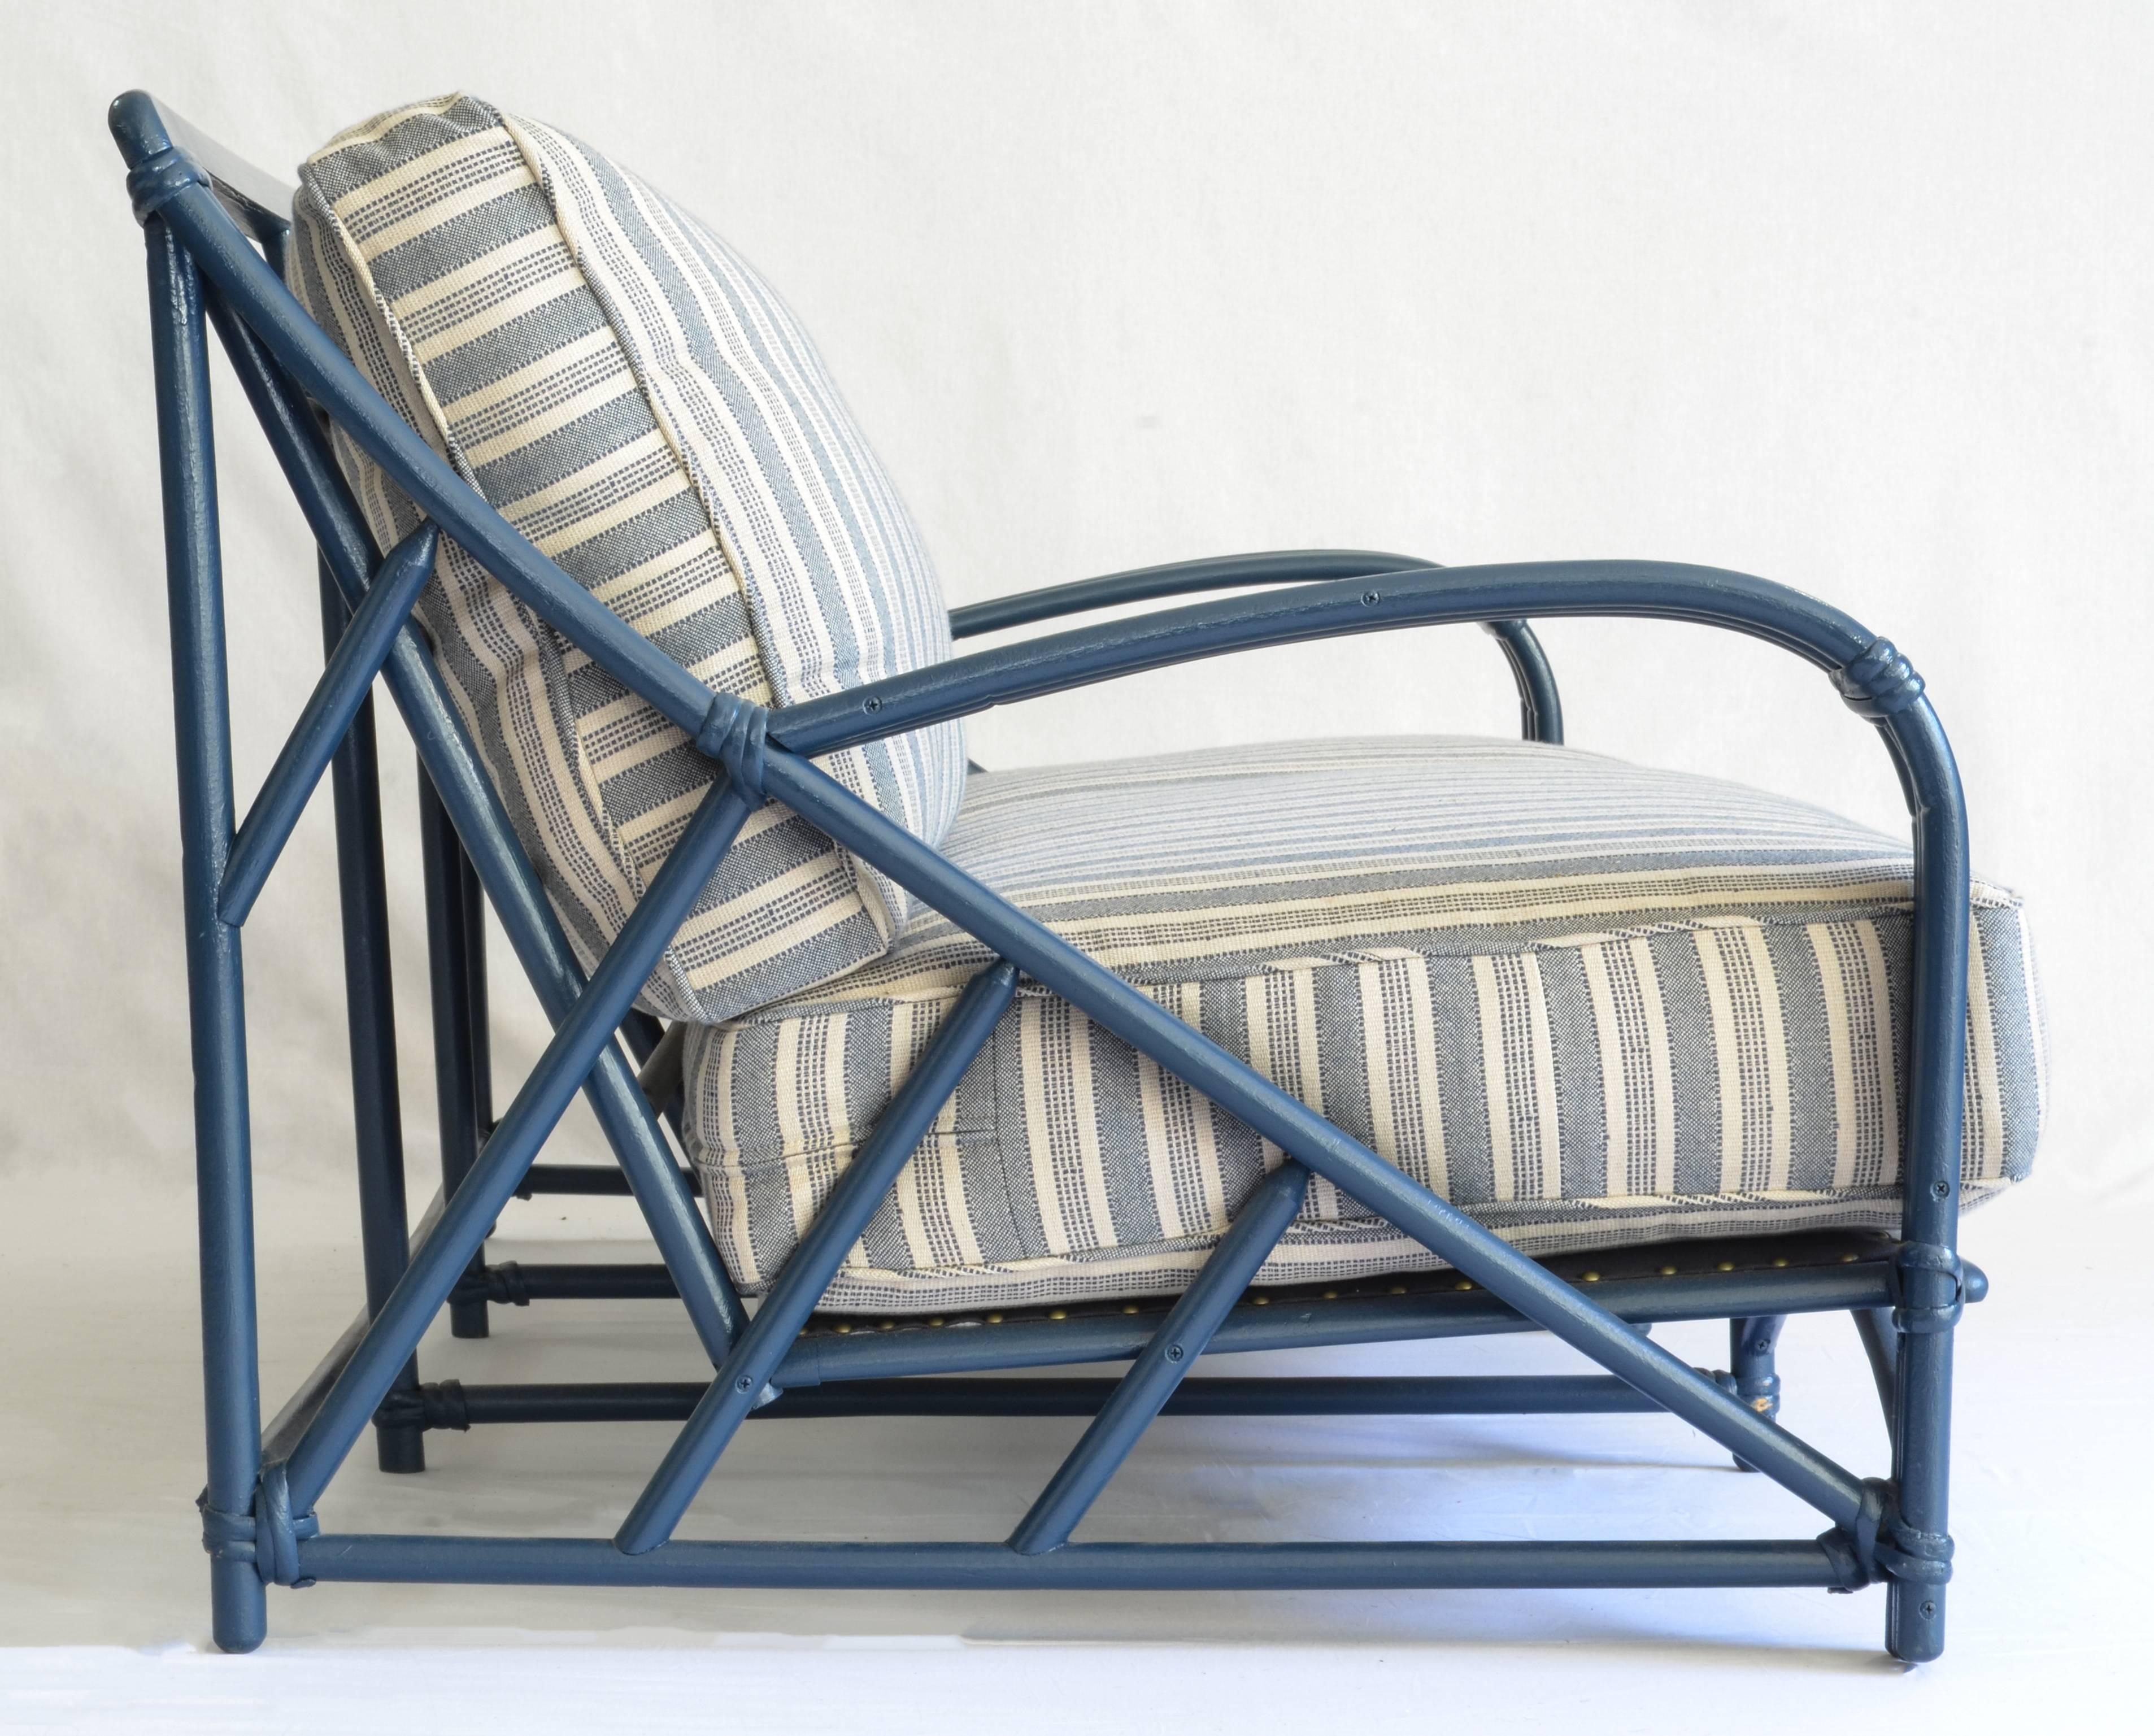 Graphic rattan frame newly painted a deep, marine blue, and freshly upholstered in Peter Dunham textiles performance fabric (Sunbrella yarns) Amida stripe in indigo on natural.